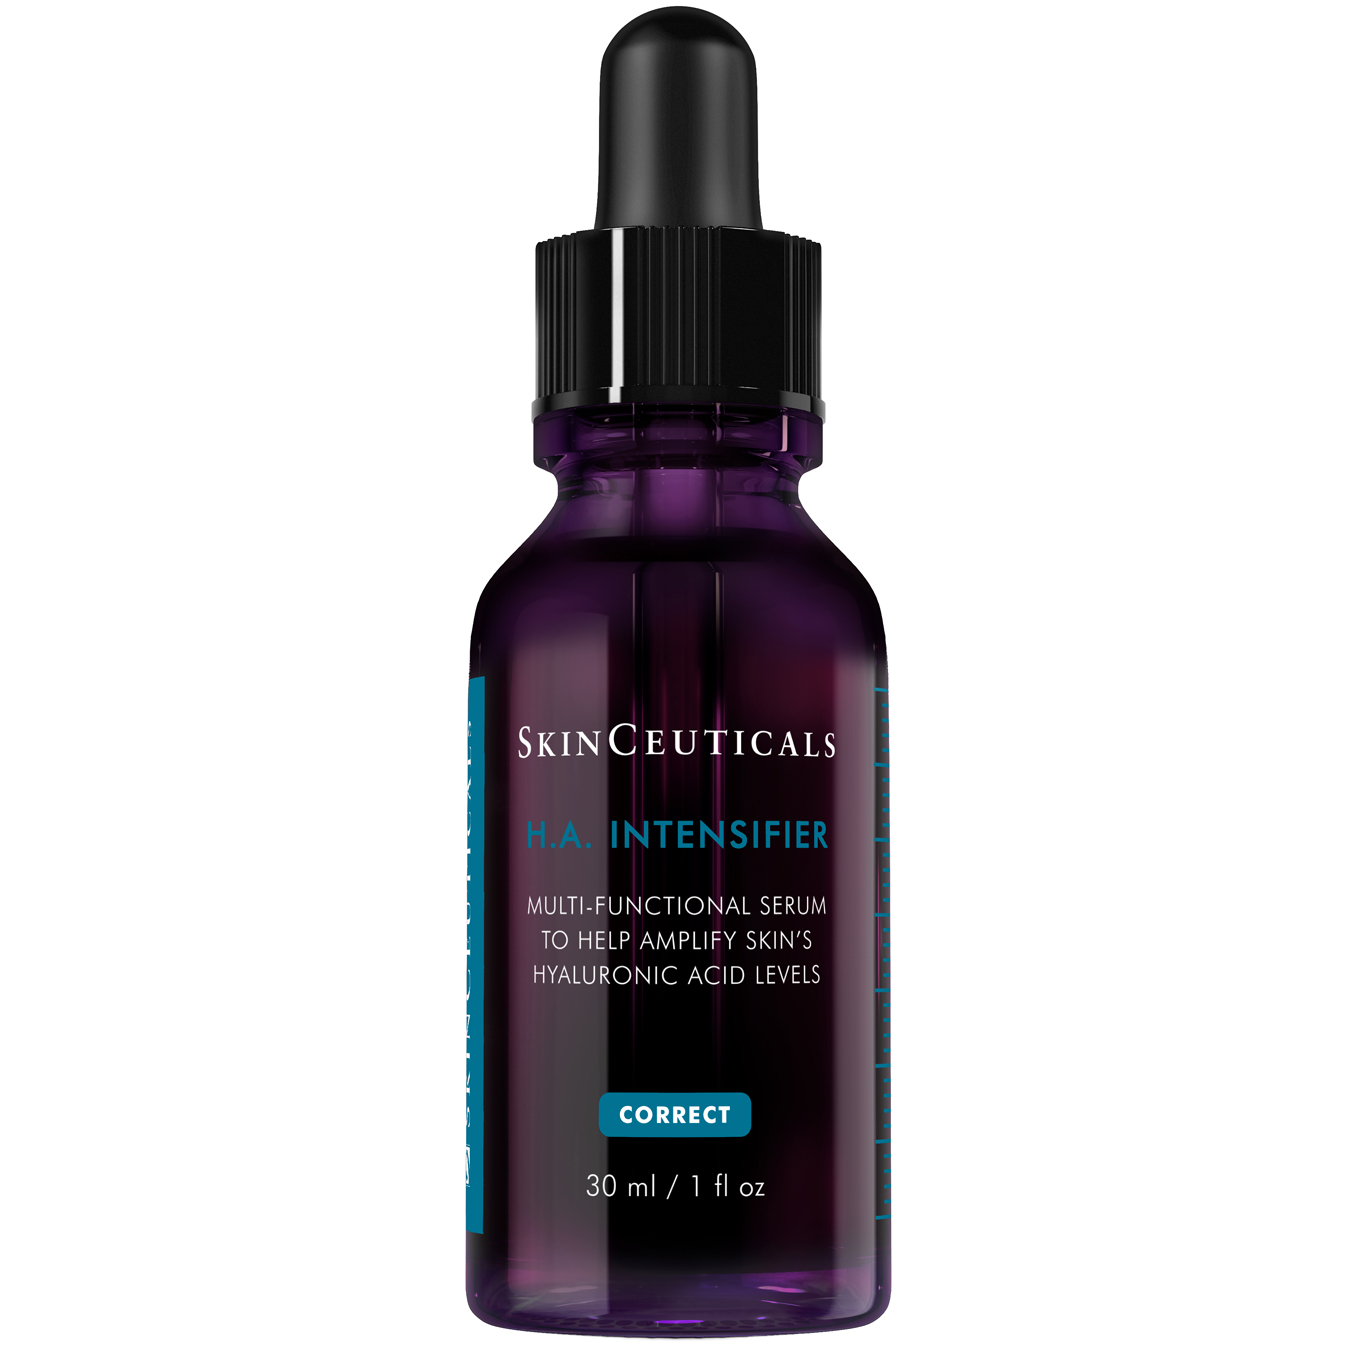 A multi-functional corrective serum to help amplify skin’s hyaluronic acid levels